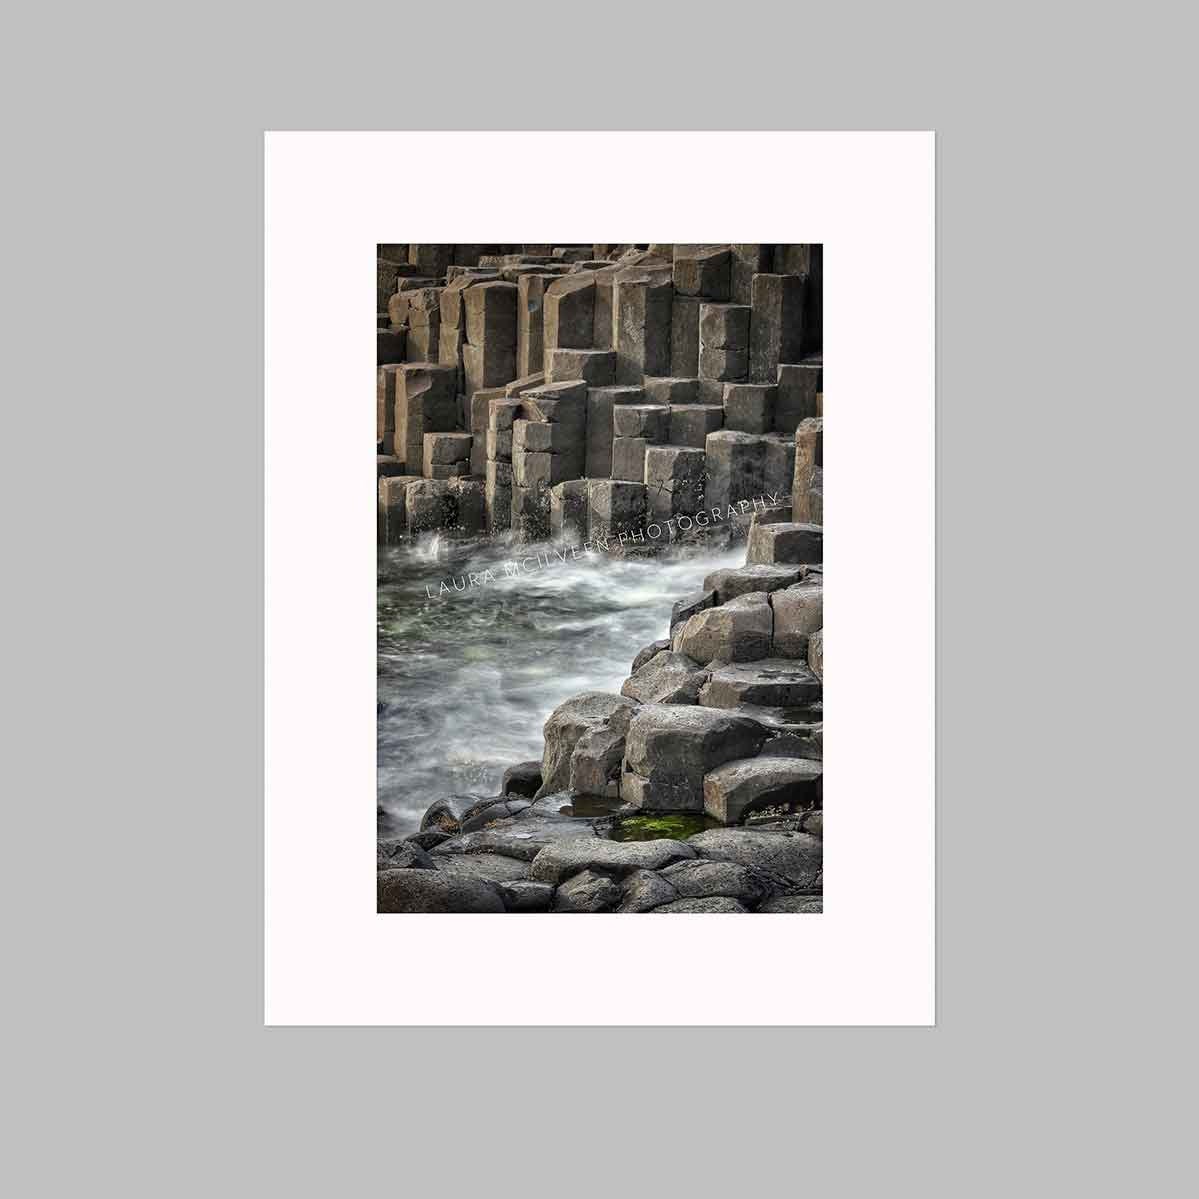 'Formations' - The Giant's Causeway